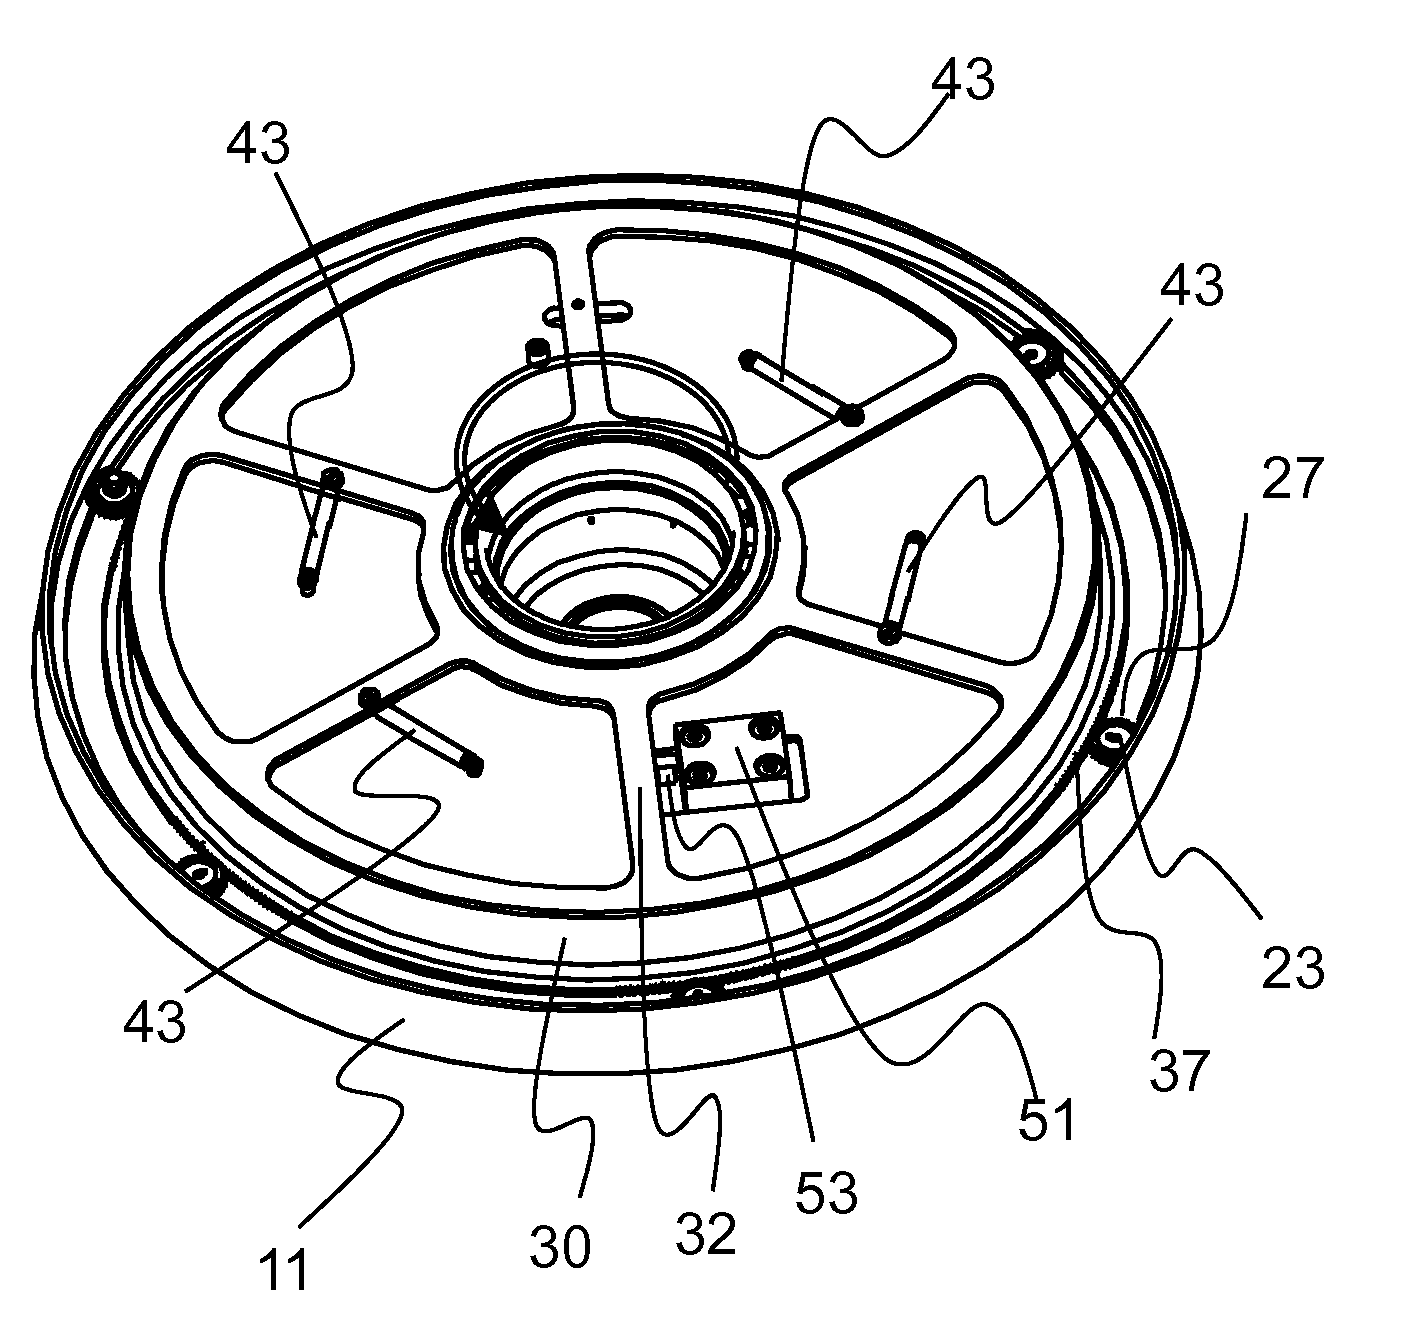 Device for holding wafer shaped articles